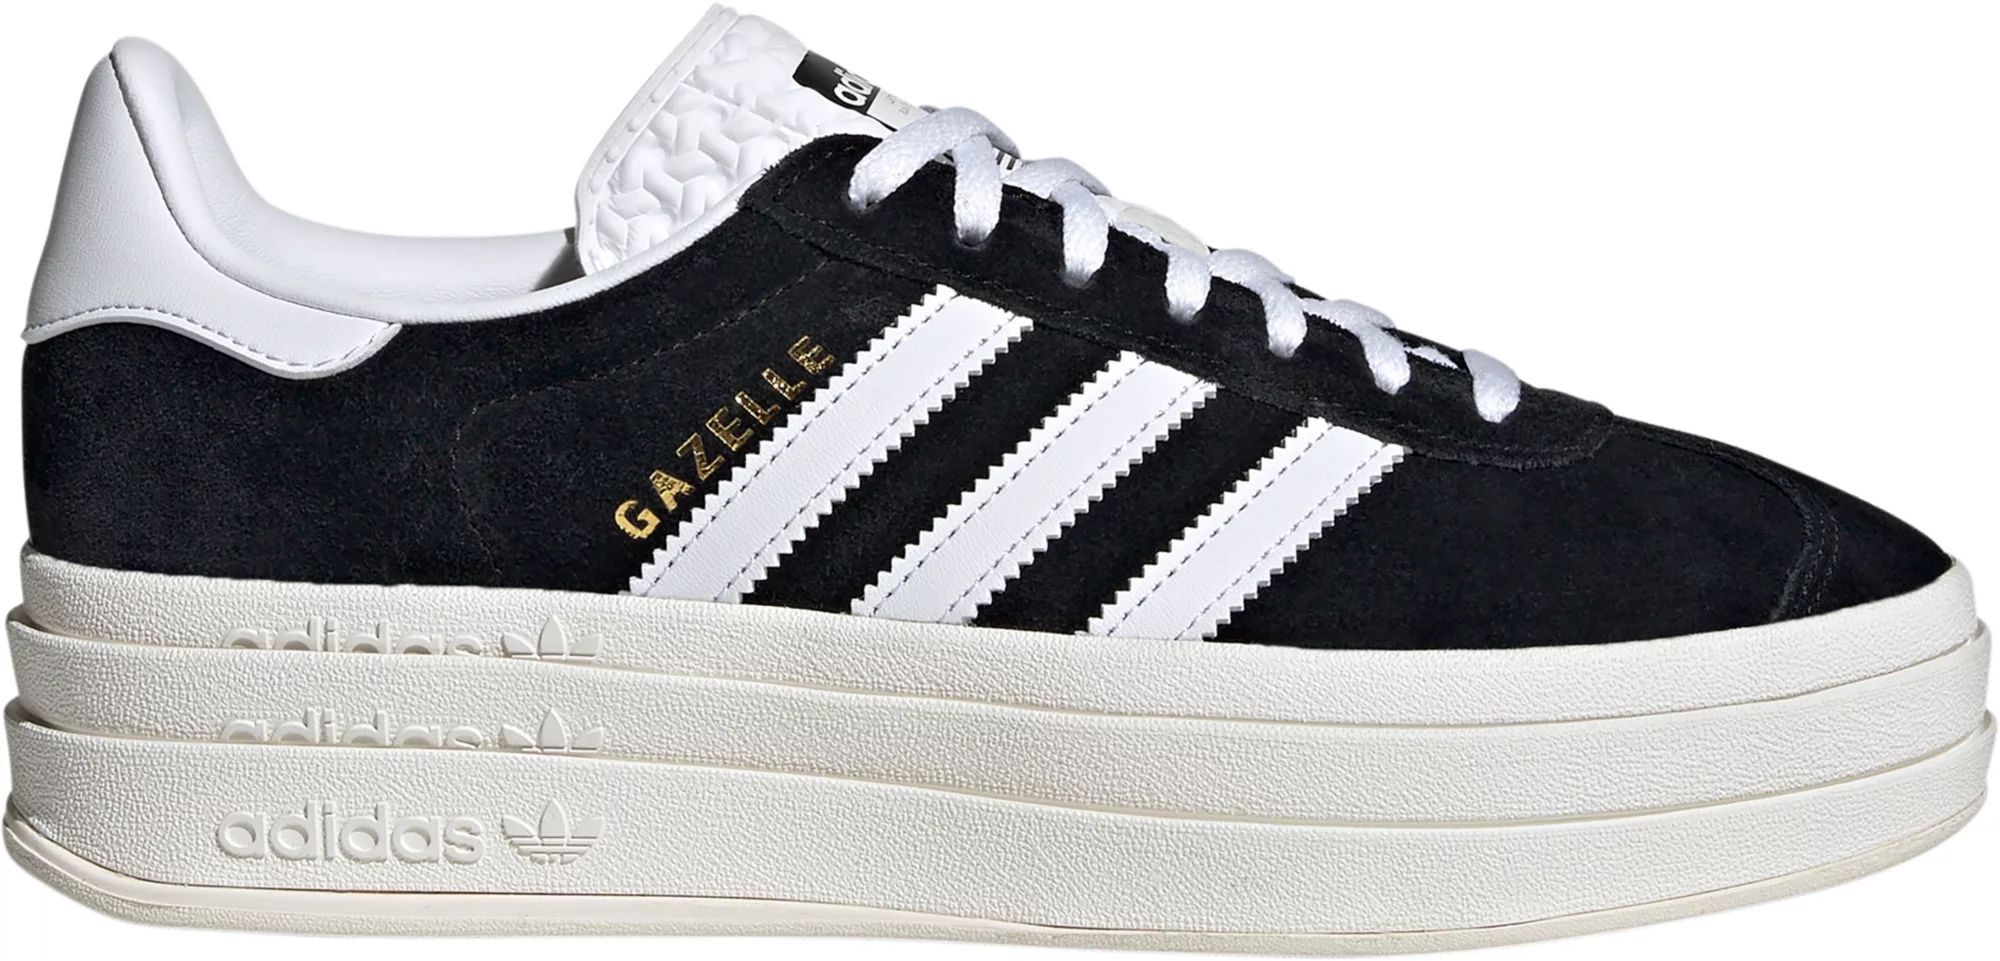 adidas Originals Women's Gazelle Bold Shoes, Size 7, Blk/White/Gold | Dick's Sporting Goods